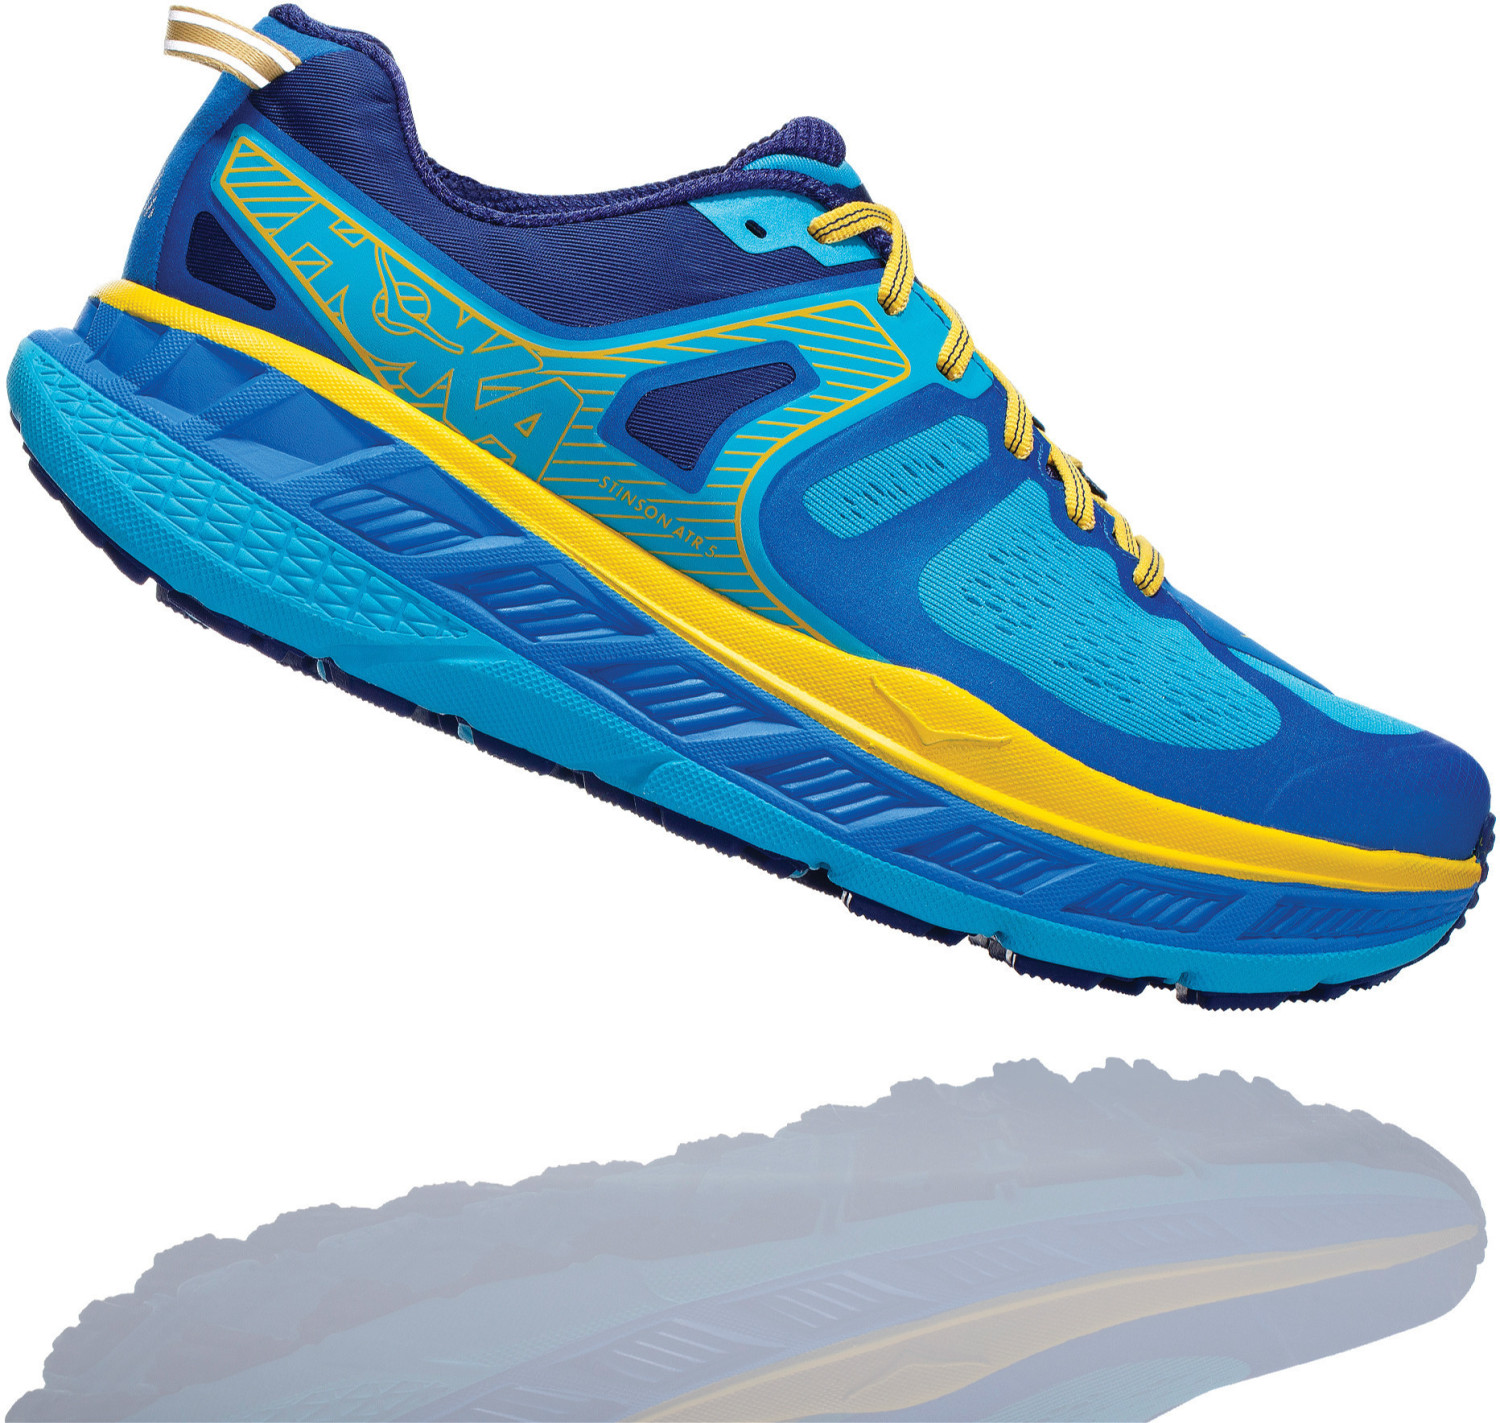 Buy Hoka One One Stinson ATR 5 from £111.47 (Today) – Best Deals on ...